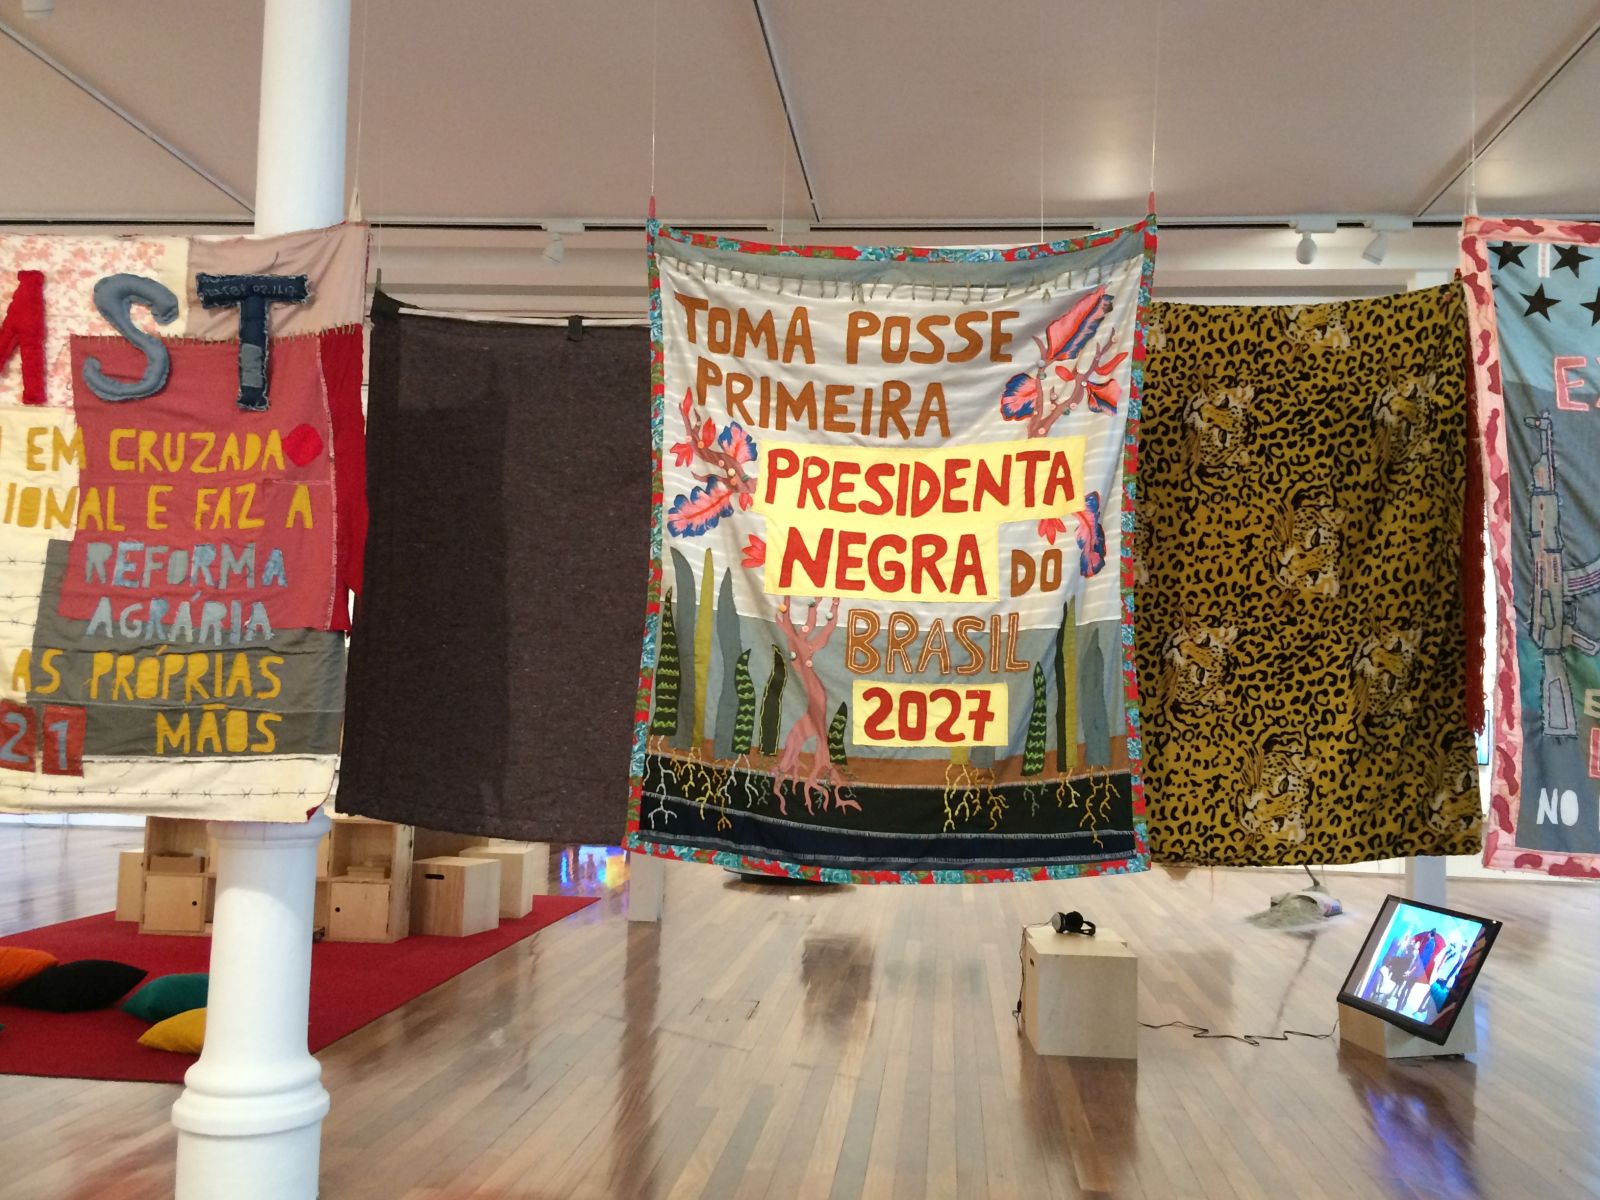 Artworks by Randolpho Lamanier, 2018. Several colourful banners hang in an high-ceilinged room. The central banner, featuring stylised plants in green, pink and blue, reads 'Toma posse primeira Presidenta Negra do Brasil 2027' ('First Black President of Brazil takes office 2027')